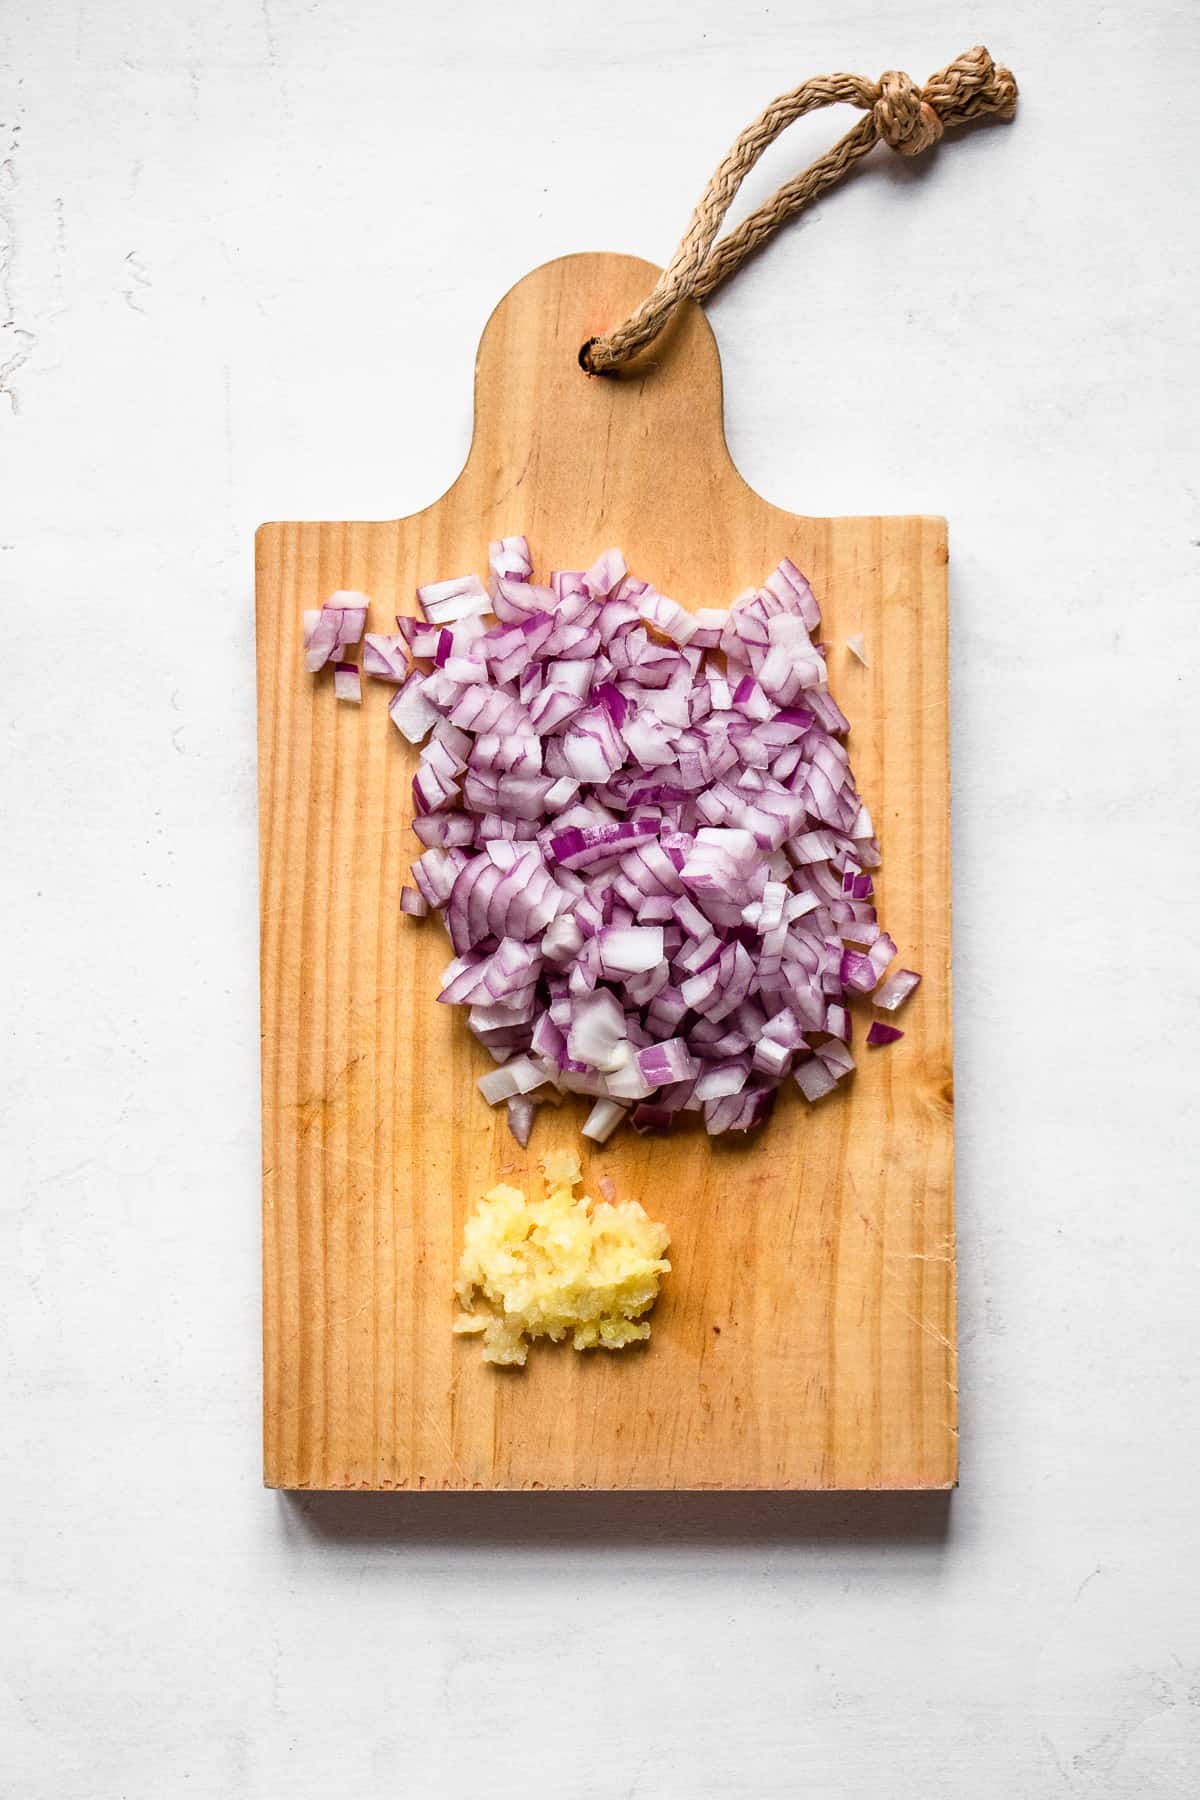 Minced red onion and garlic cloves on a wooden cutting board.